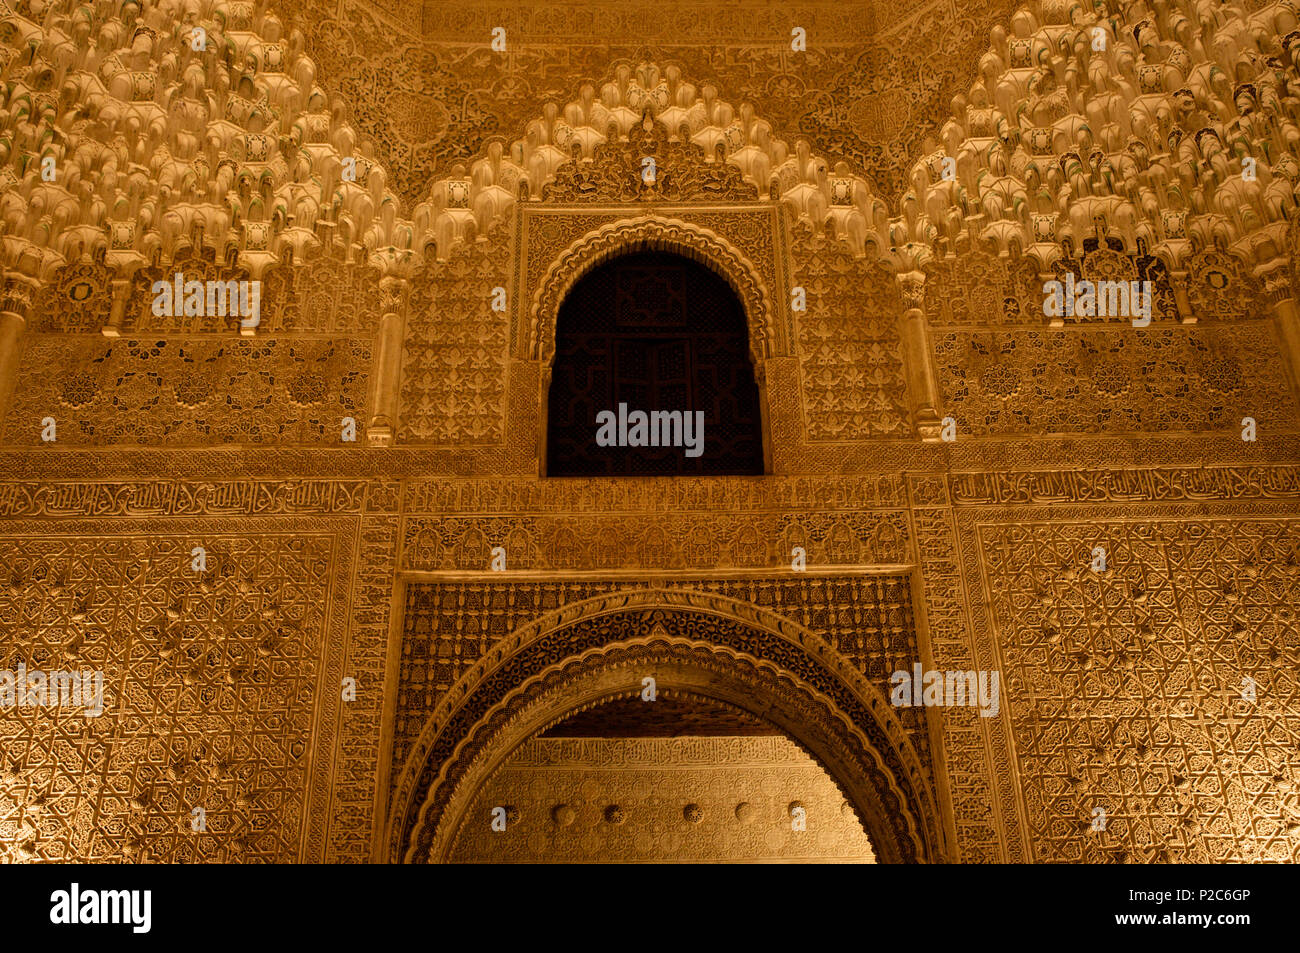 Fine Moorish wall Dekorations in the Nasrid palace in the Alhambra, night visit, Granada, Andalusia, Spain, Europe Stock Photo